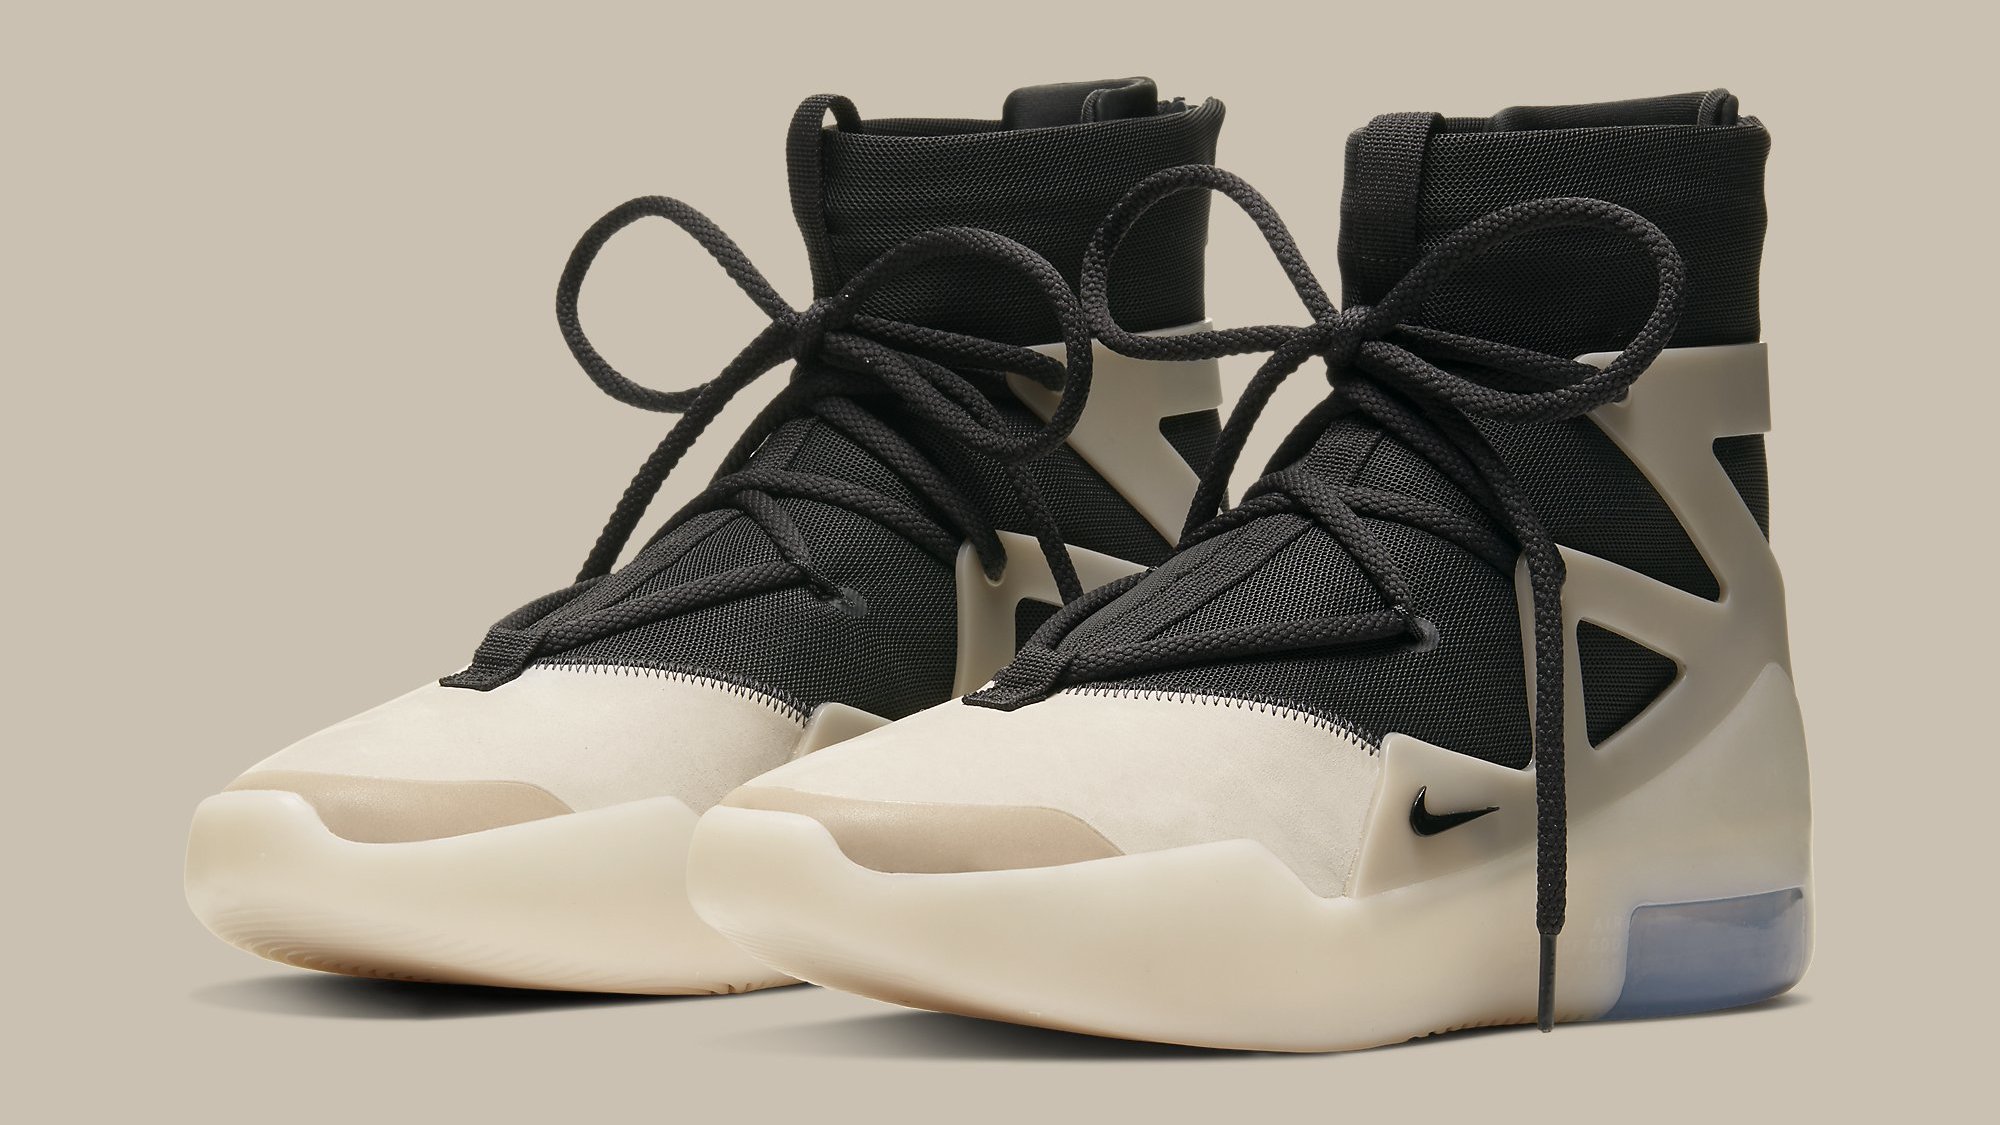 air fear of god release date